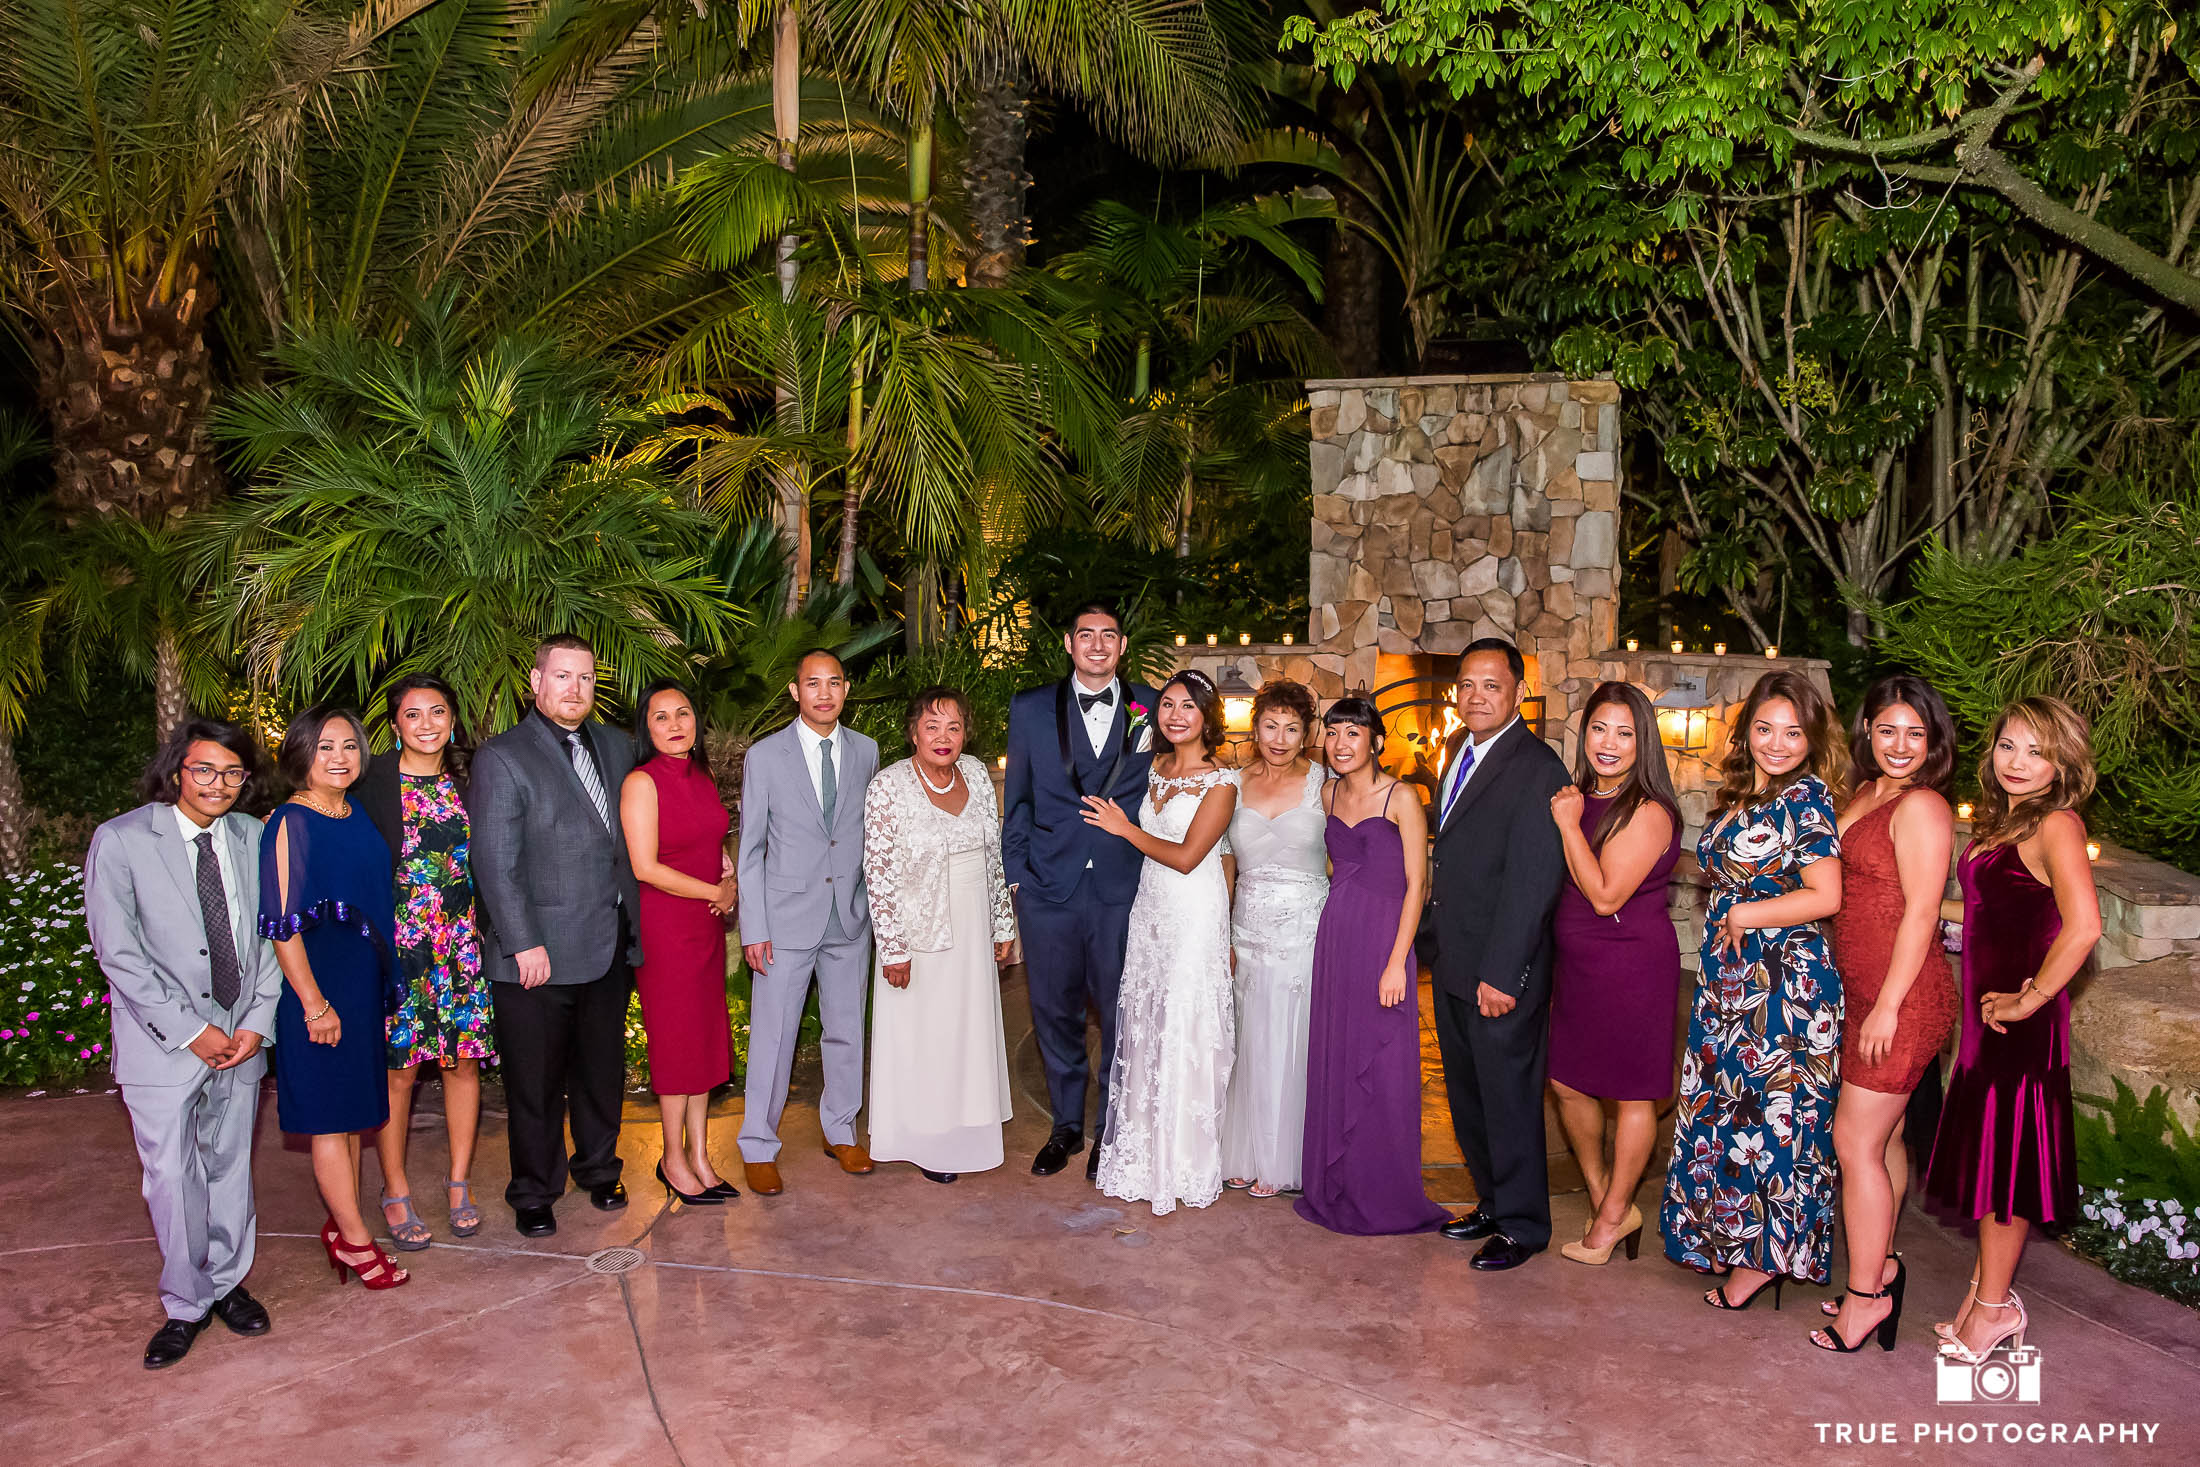 A wedding group takes a photo in front of a fireplace.